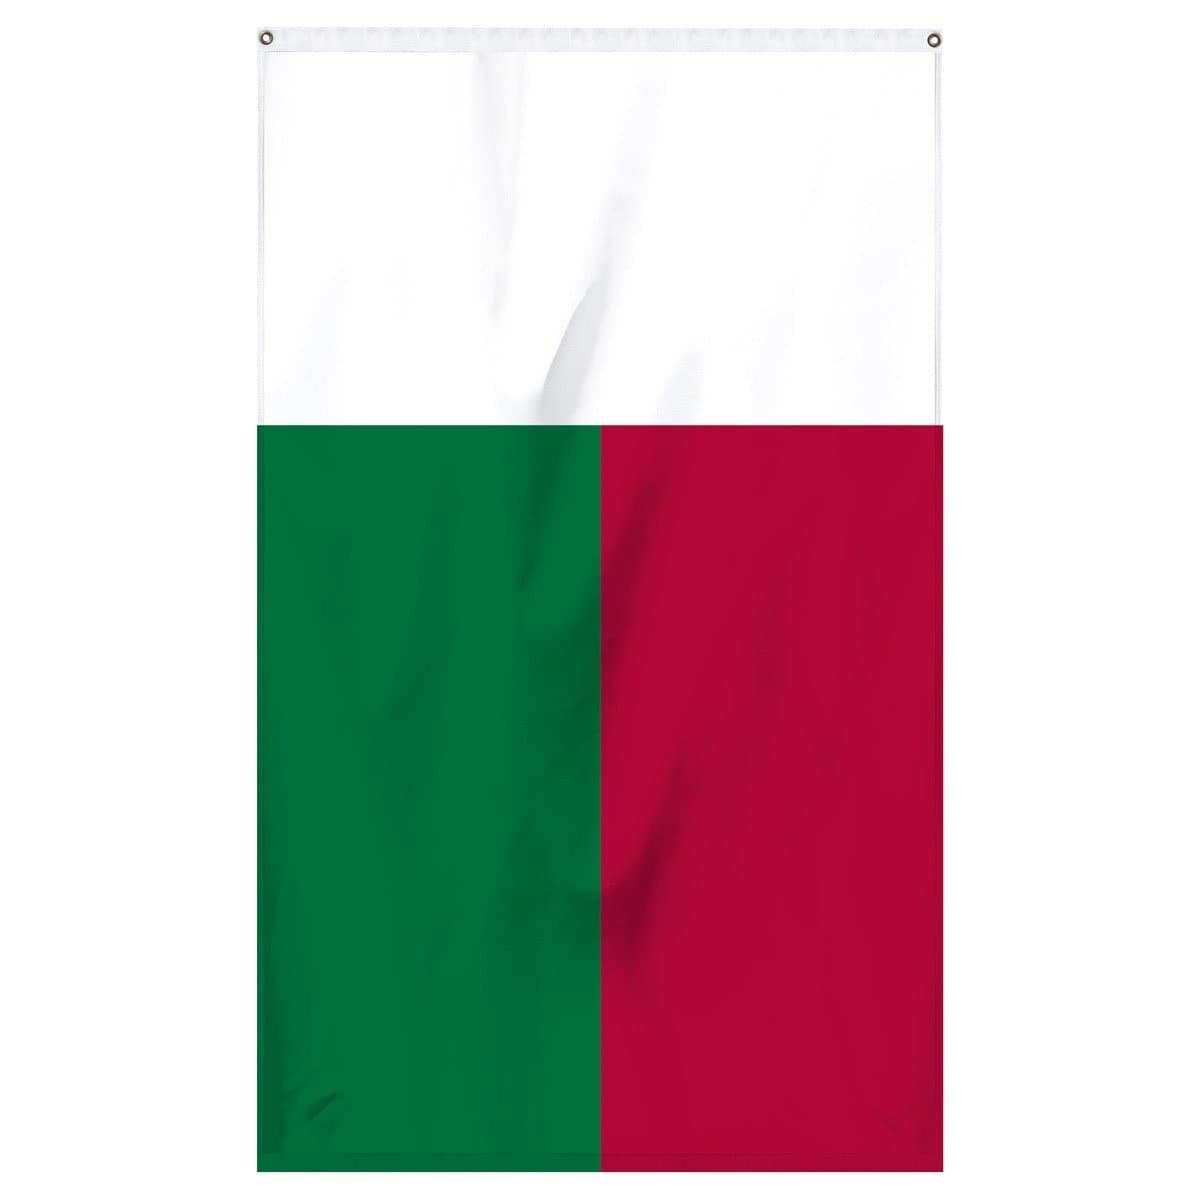 The national flag of Madagascar for flagpoles for sale online